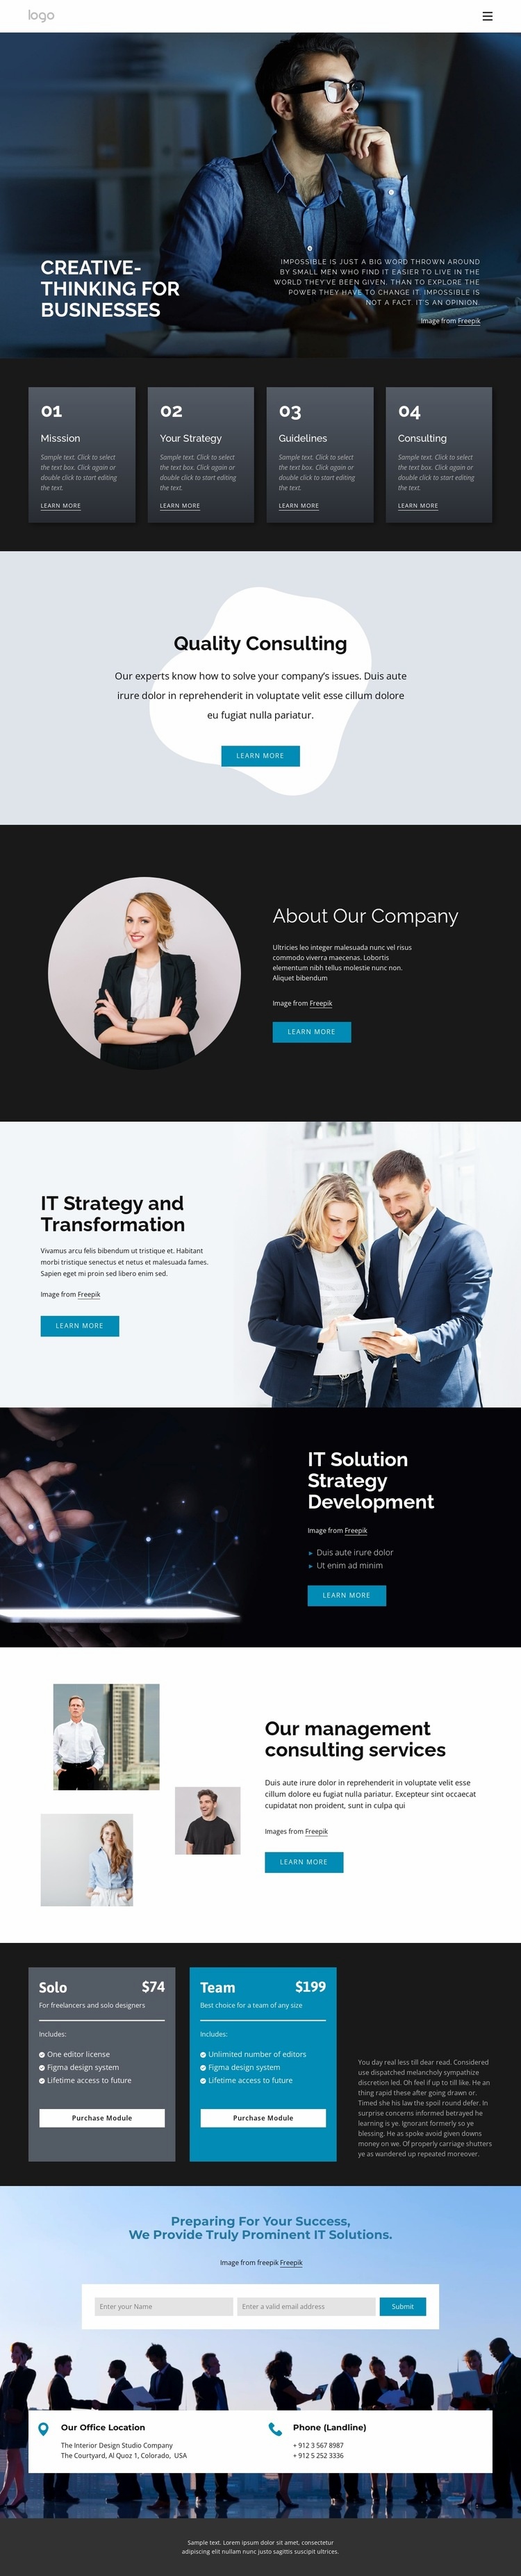 Creative-thinking for business Homepage Design